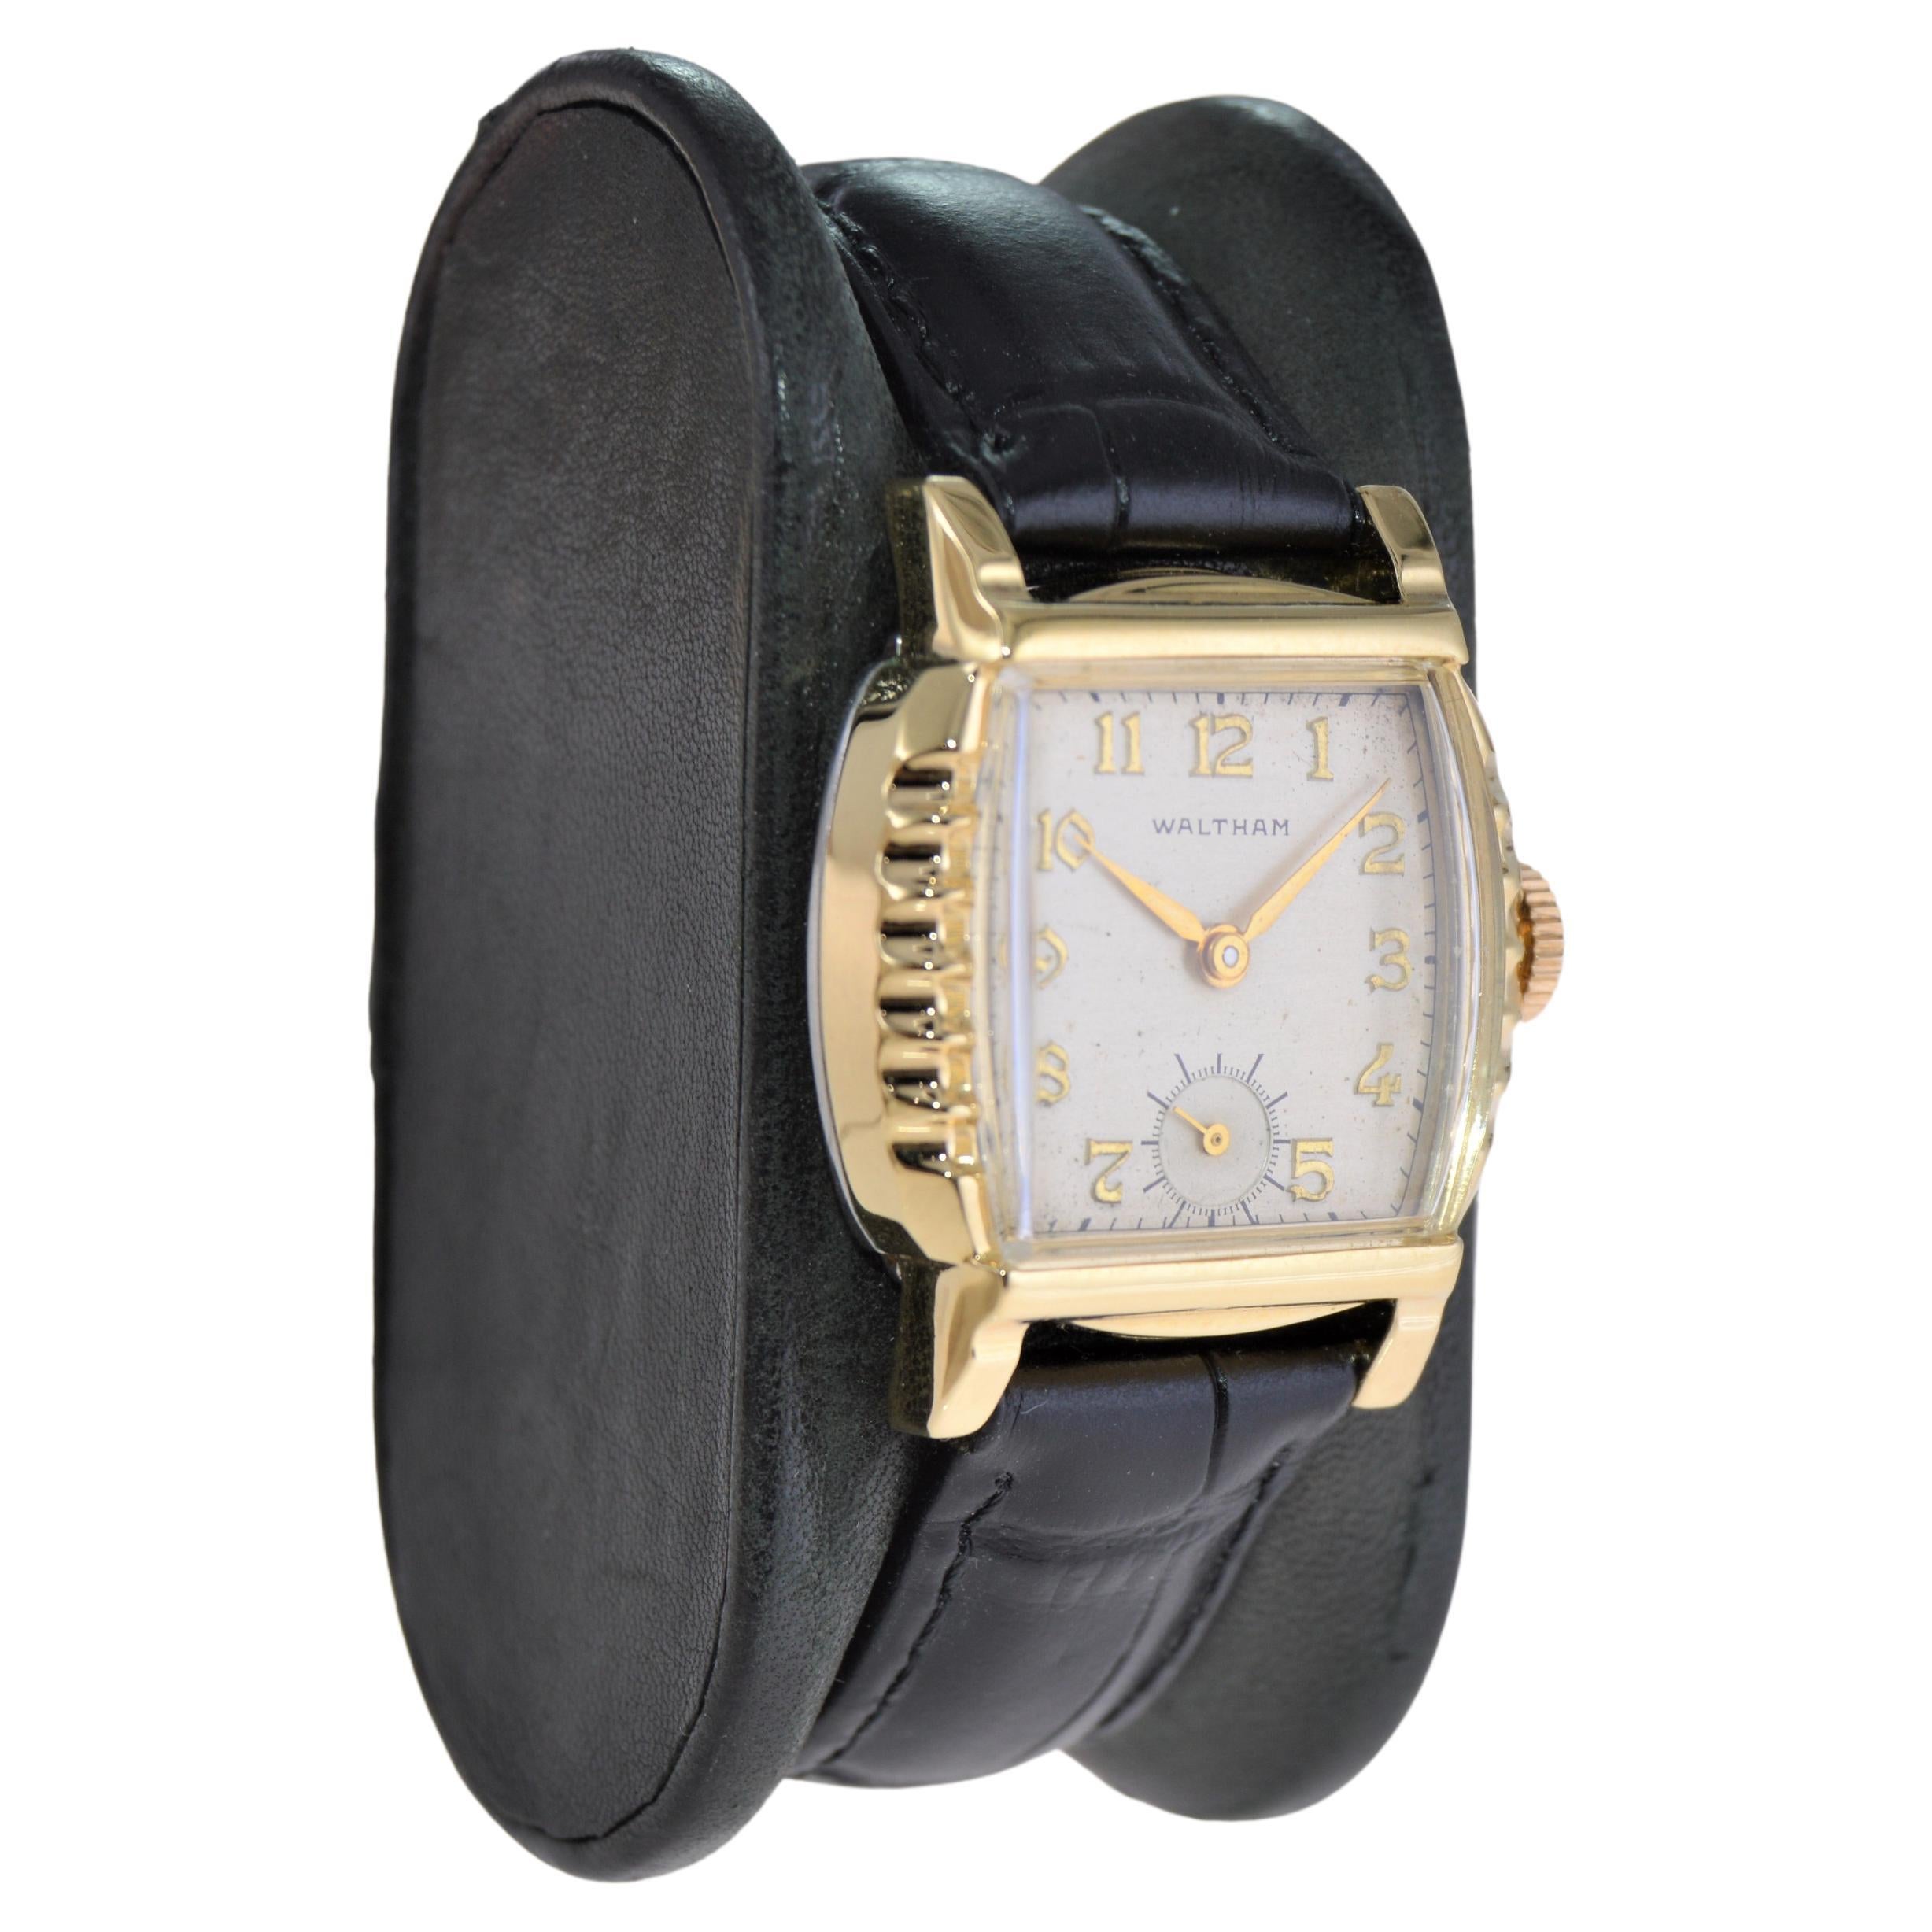 FACTORY / HOUSE: Waltham Watch Company
STYLE / REFERENCE: Art Deco / Tortue Shape
METAL / MATERIAL: Yellow Gold Filled
CIRCA / YEAR: 1940's
DIMENSIONS / SIZE:  Length 34mm X Width 27mm
MOVEMENT / CALIBER: Manual Winding / 17 Jewels / Caliber